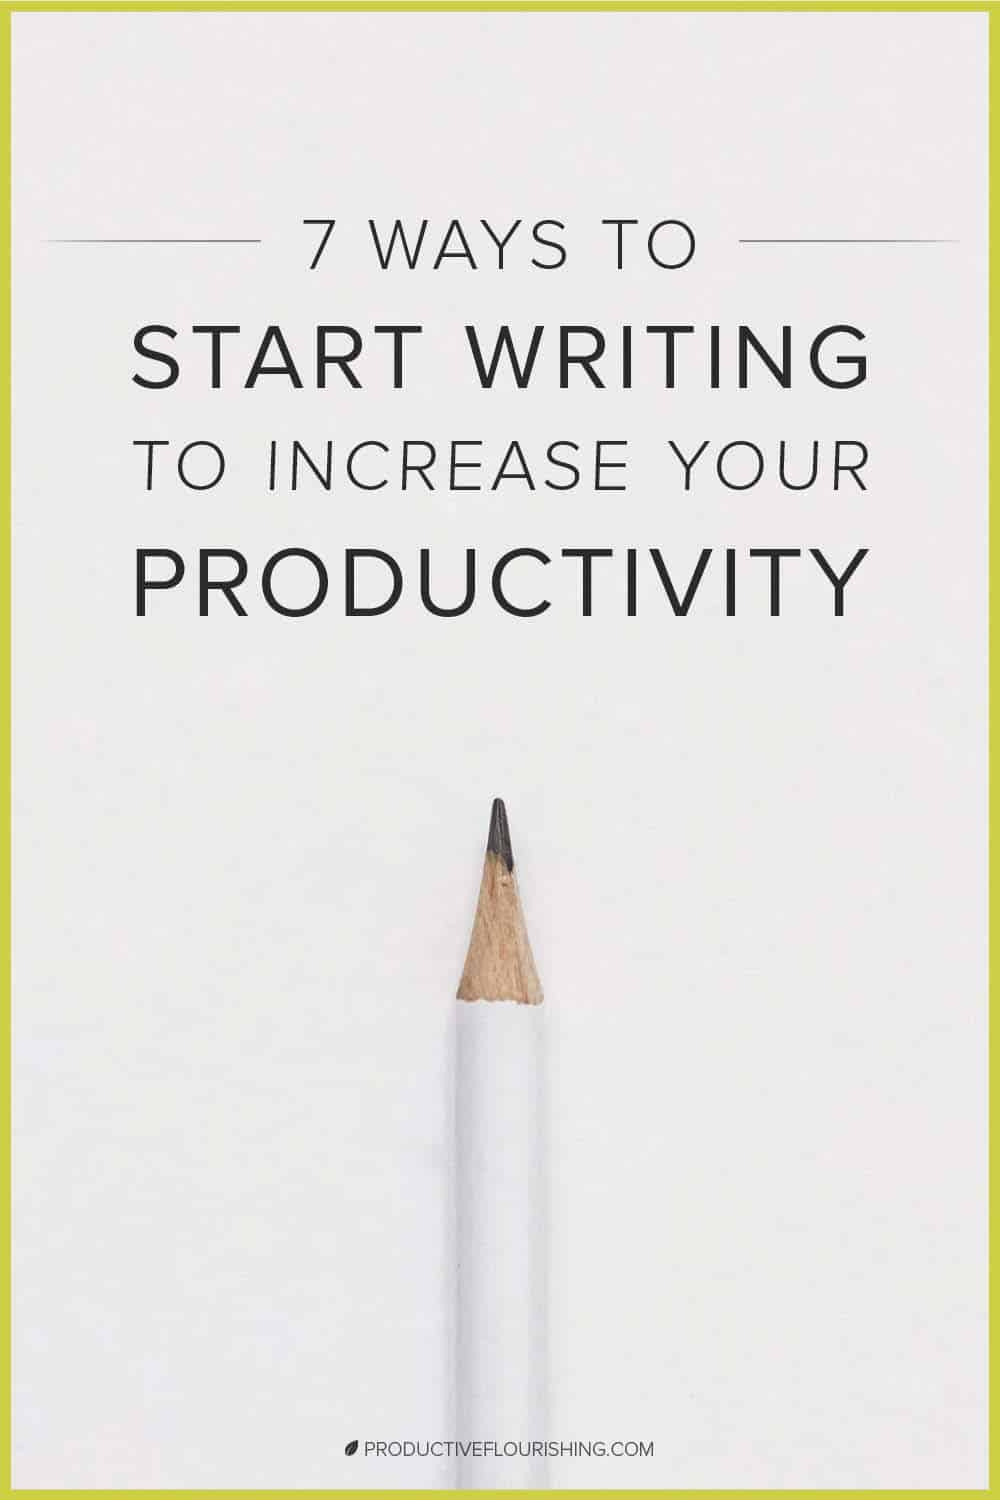 Here are 7 ways you can start writing to improve your business productivity. Even with the clearest of goals and intentions, entrepreneurs can find that it’s all too easy to get distracted and end up accomplishing very little. The act of writing in your small business is inherently mindful, bringing people into a state of awareness of their thoughts and of the present moment. #businesswriting #smallbusinessowner #productiveflourishing